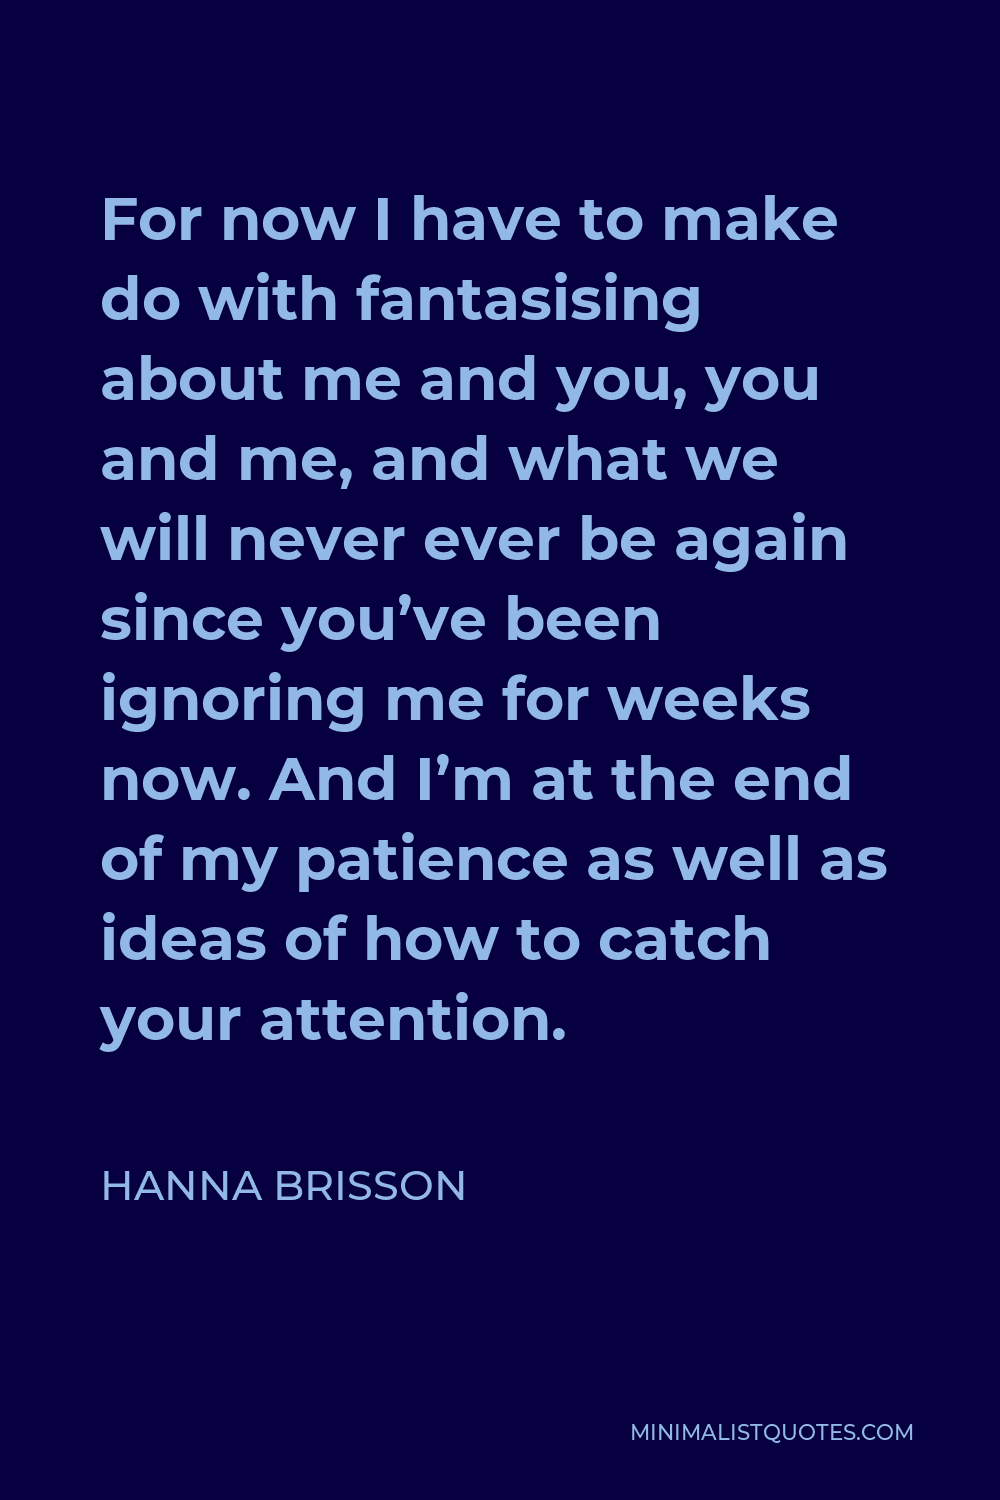 Hanna Brisson Quote - For now I have to make do with fantasising about me and you, you and me, and what we will never ever be again since you’ve been ignoring me for weeks now. And I’m at the end of my patience as well as ideas of how to catch your attention.